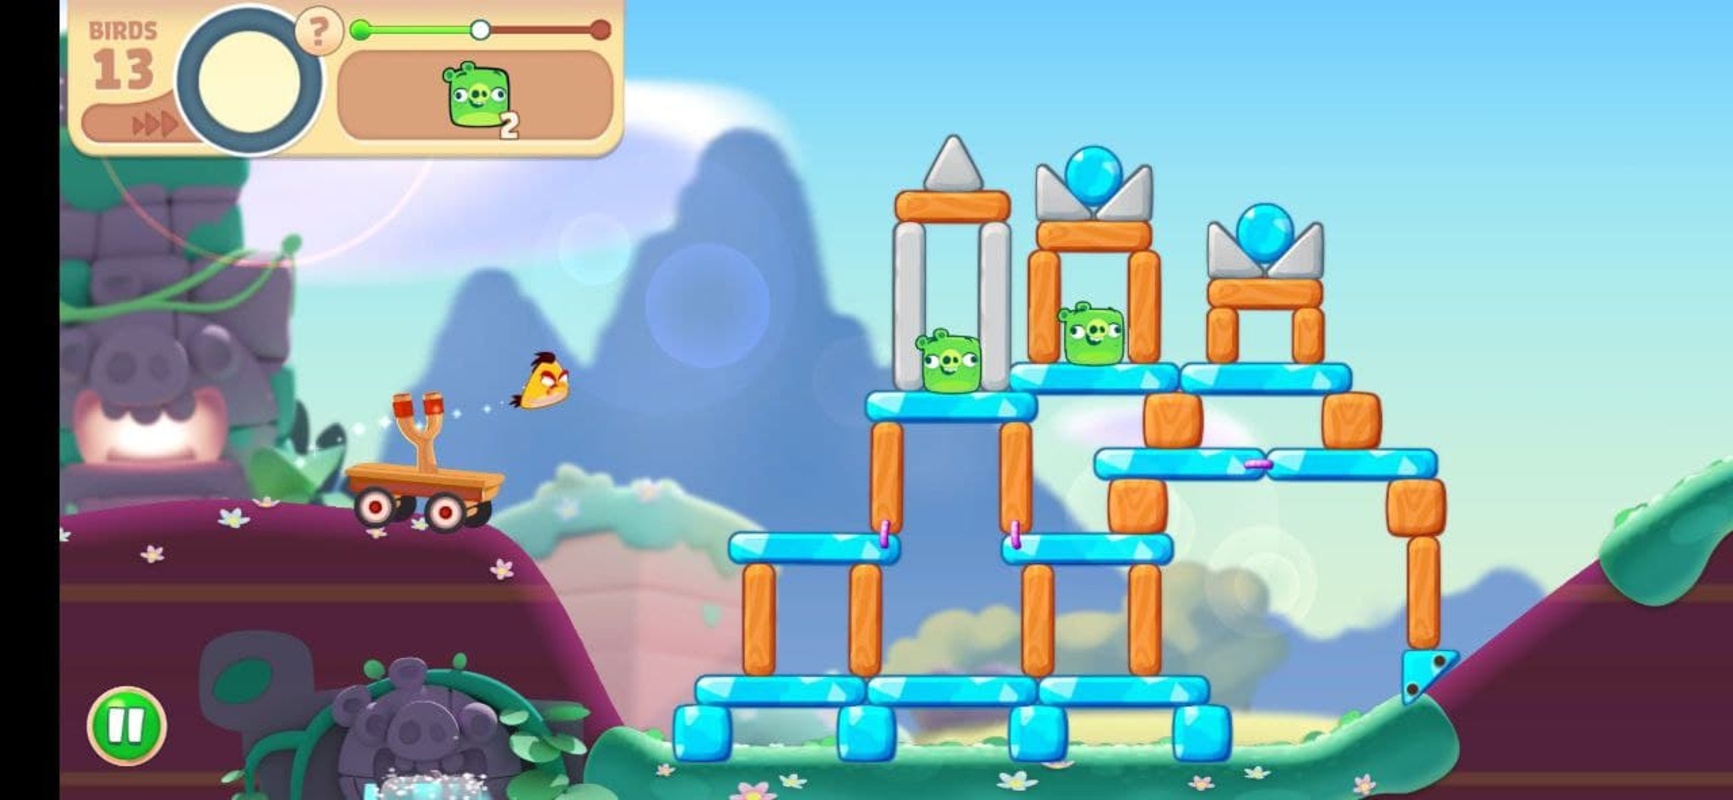 Angry Birds Journey 3.2.0 APK for Android Screenshot 8